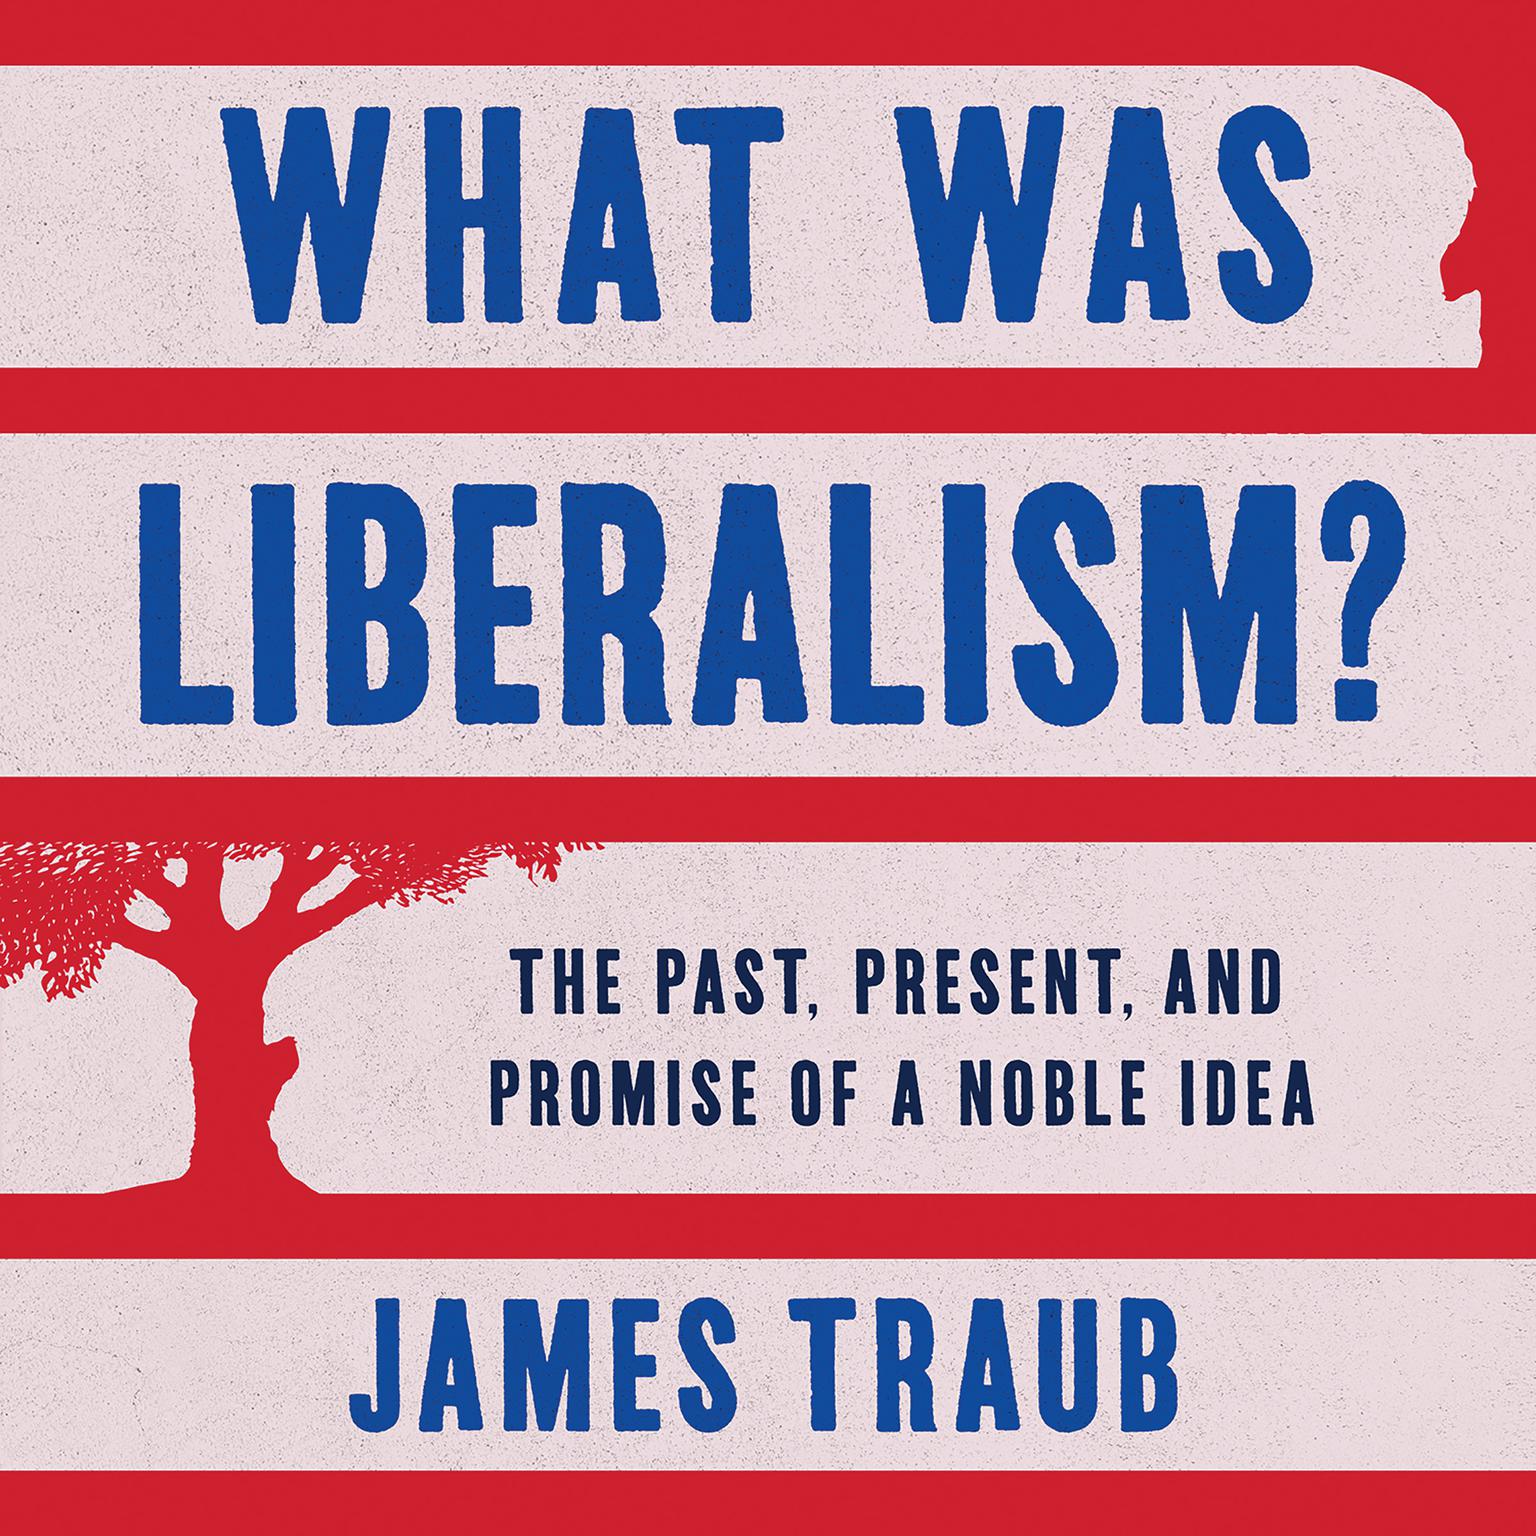 What Was Liberalism?: The Past, Present, and Promise of a Noble Idea Audiobook, by James Traub